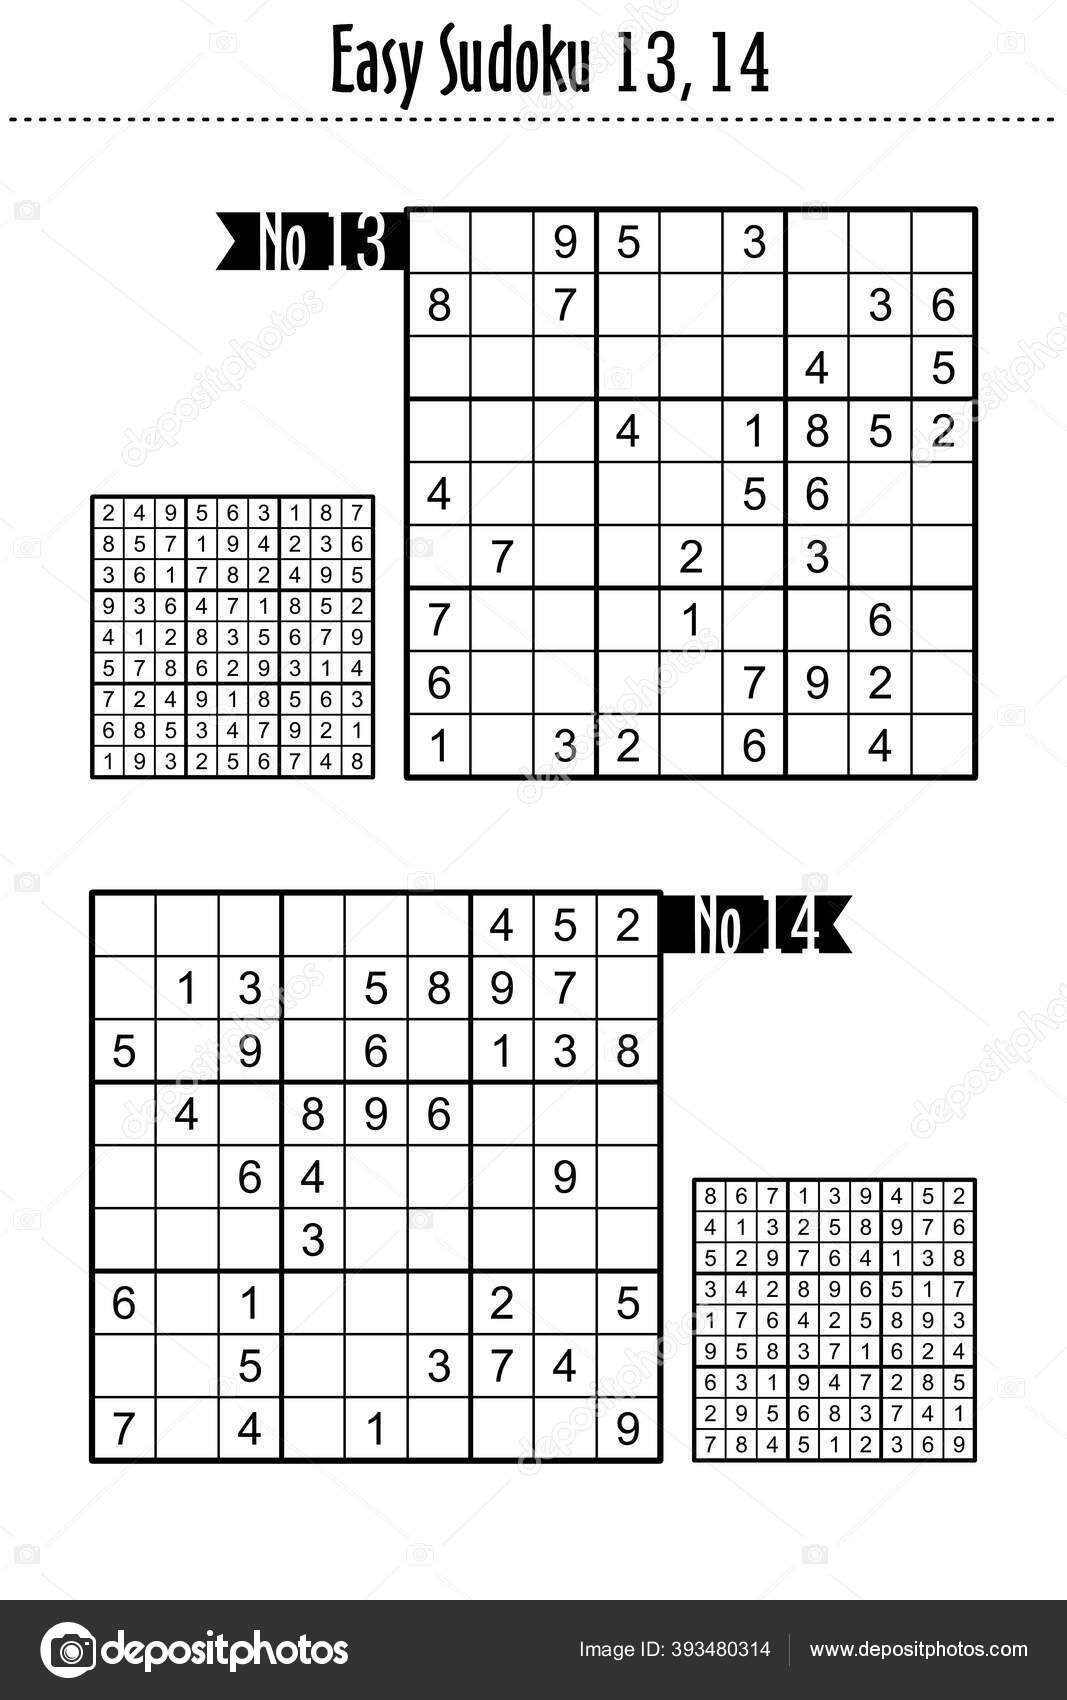 Easy Sudoku Puzzles Two Games Suitable Kids Beginners Just Relax Vector Image By C Ratselmeister Vector Stock 393480314